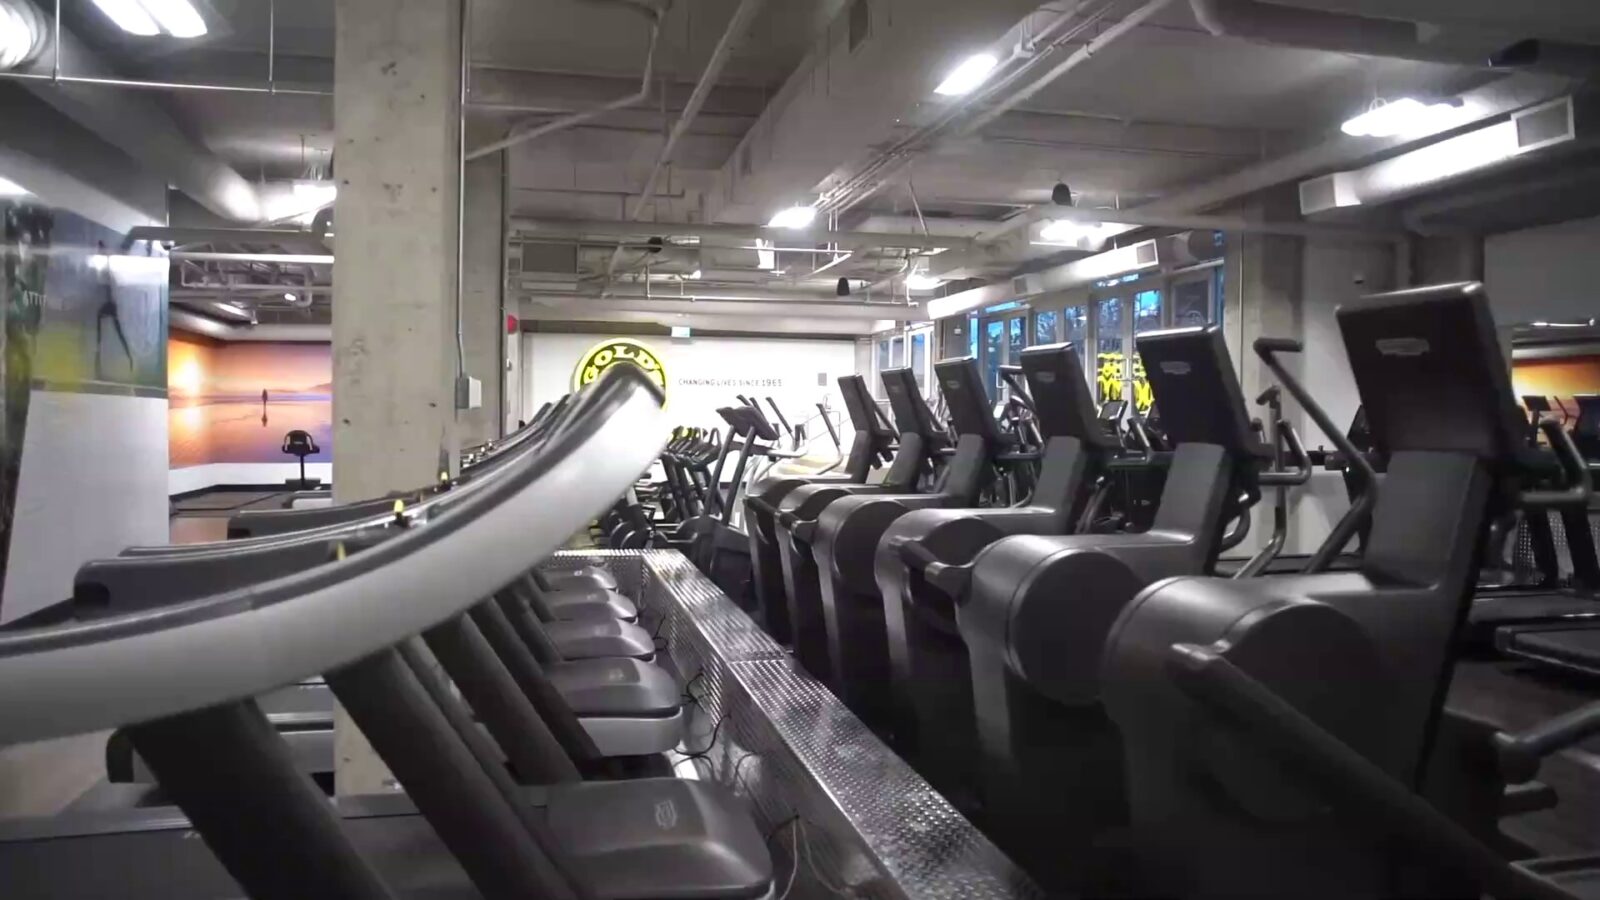 What makes the best Vancouver gym?